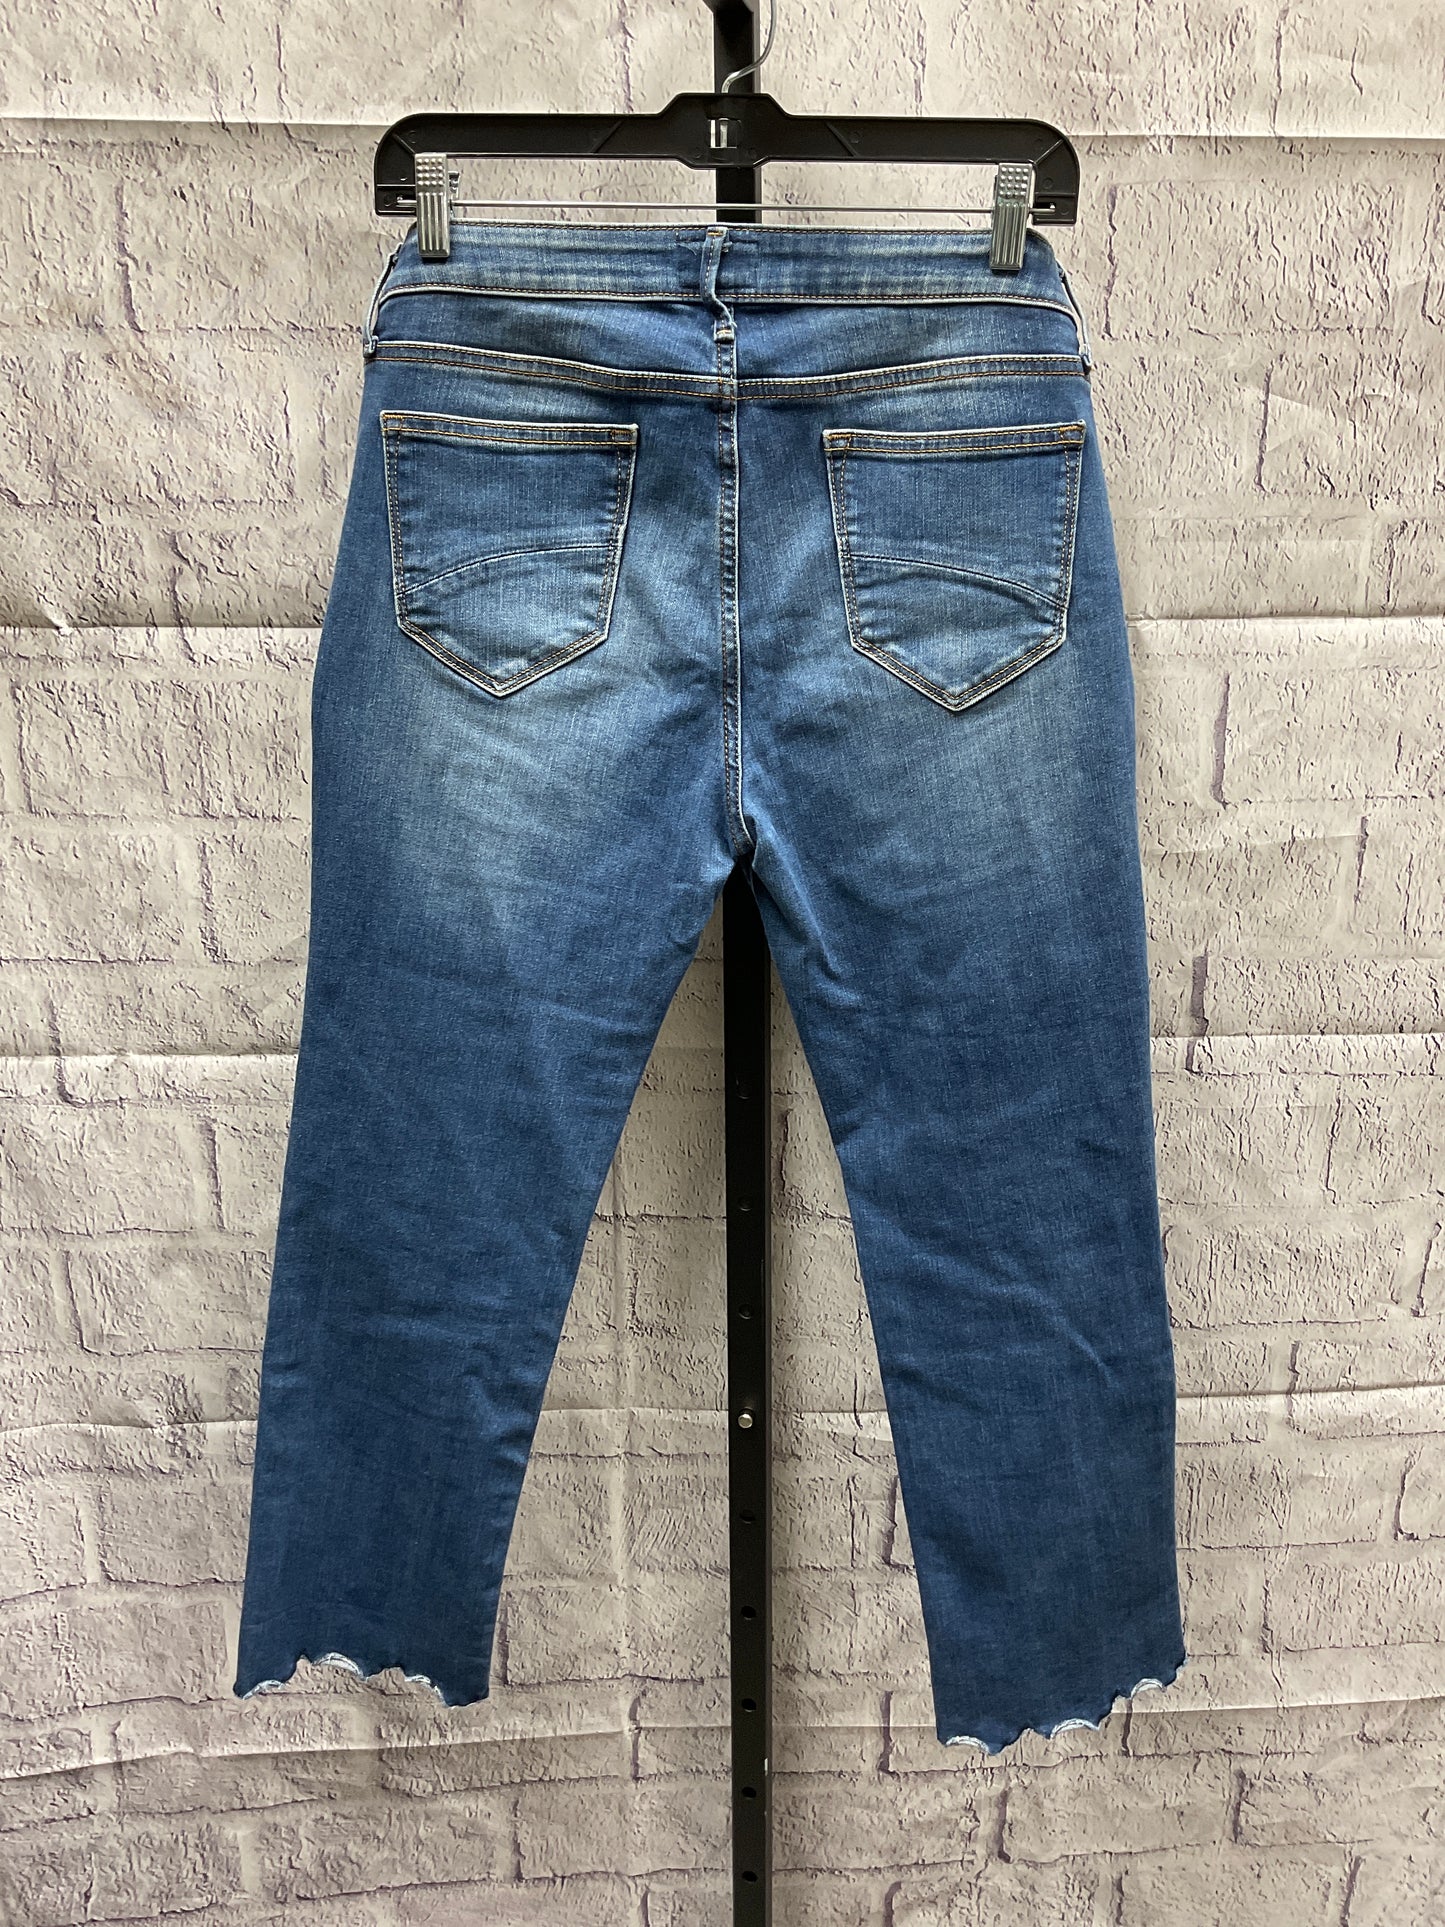 Jeans Cropped By Driftwood  Size: 8